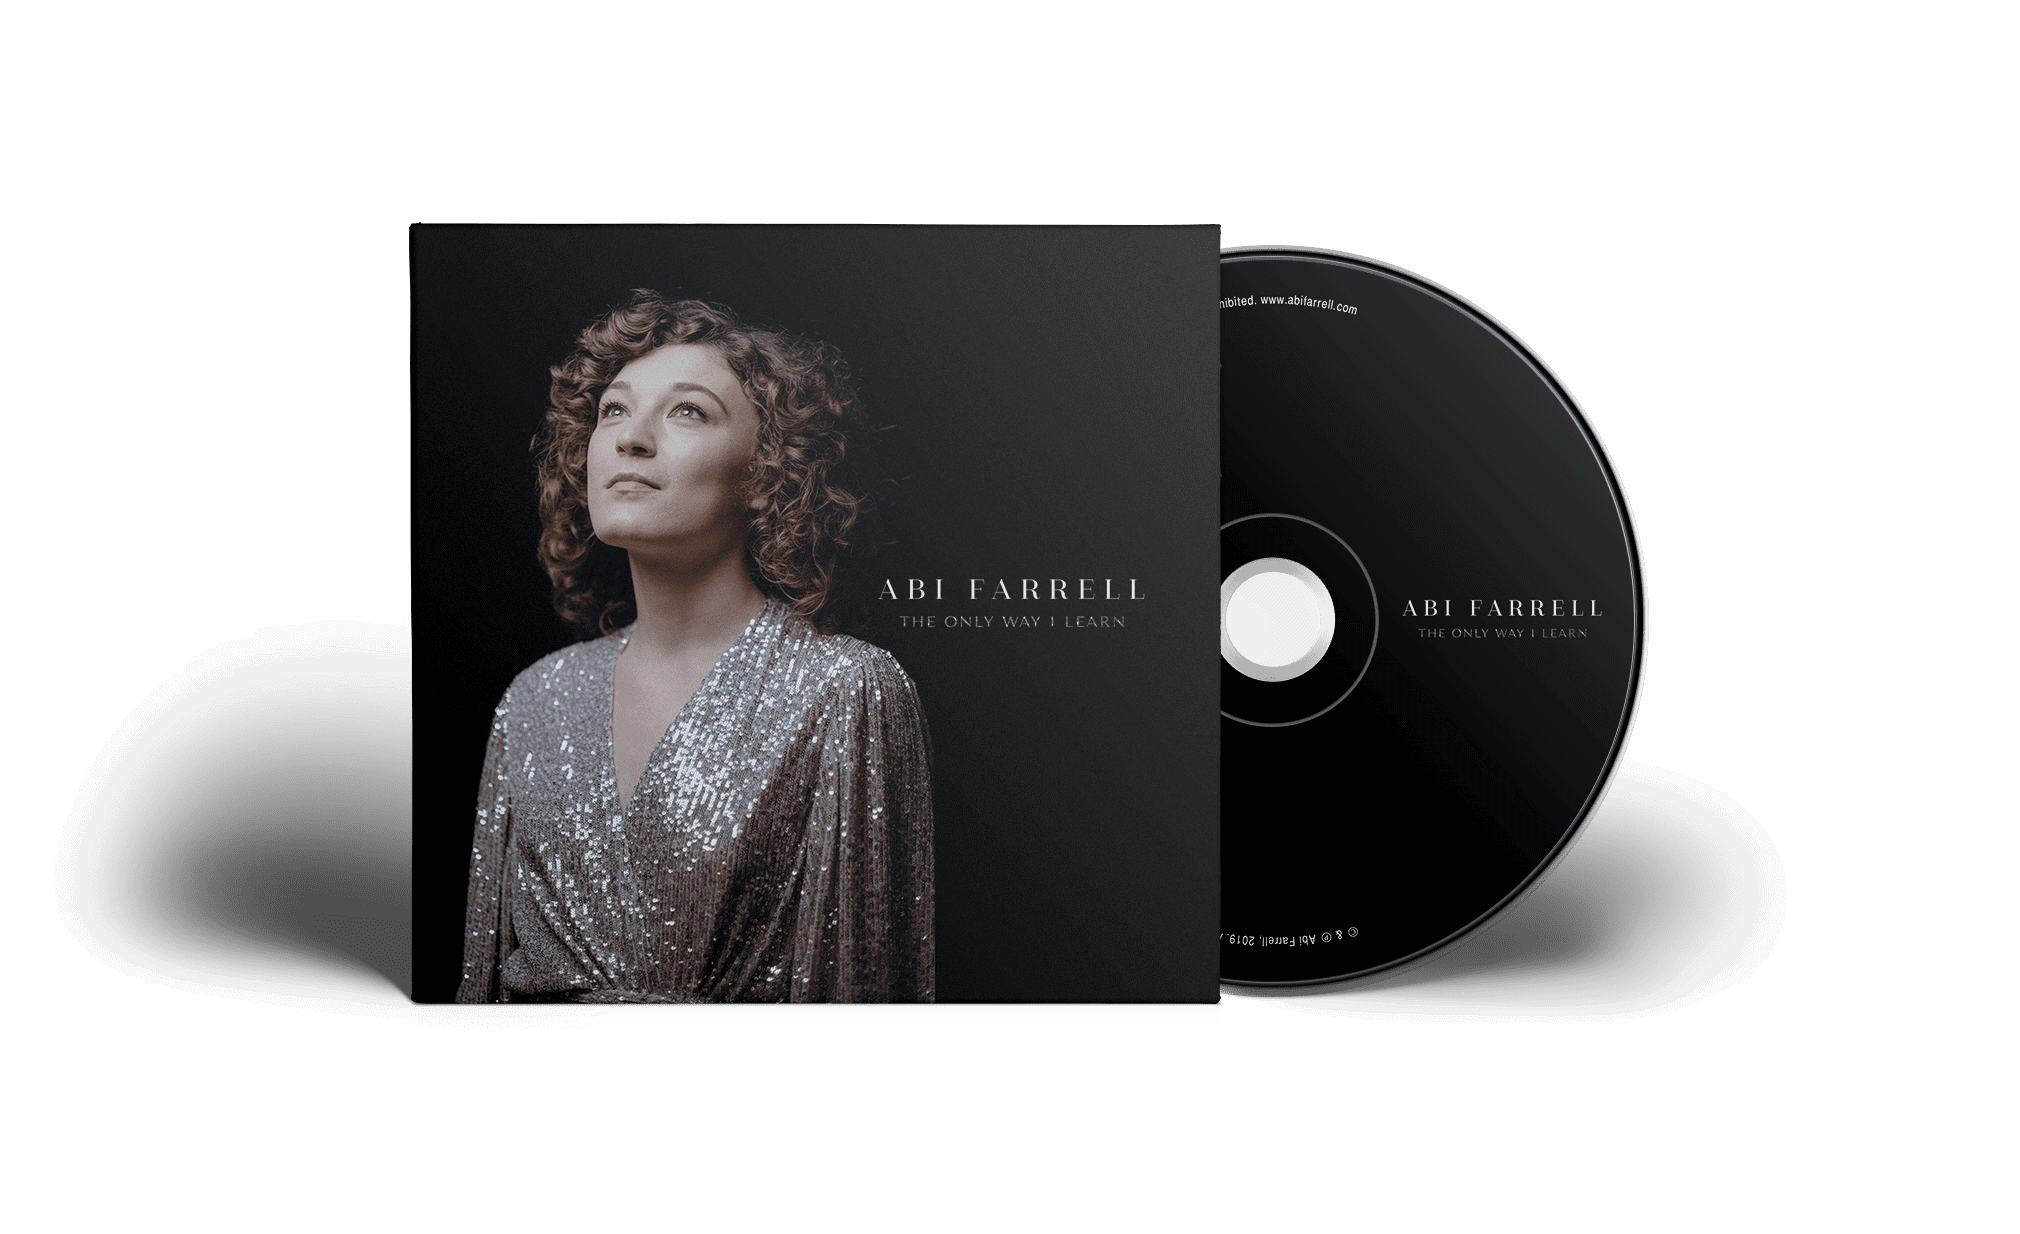 abi farrell the only way I learn EP digipack album cover design